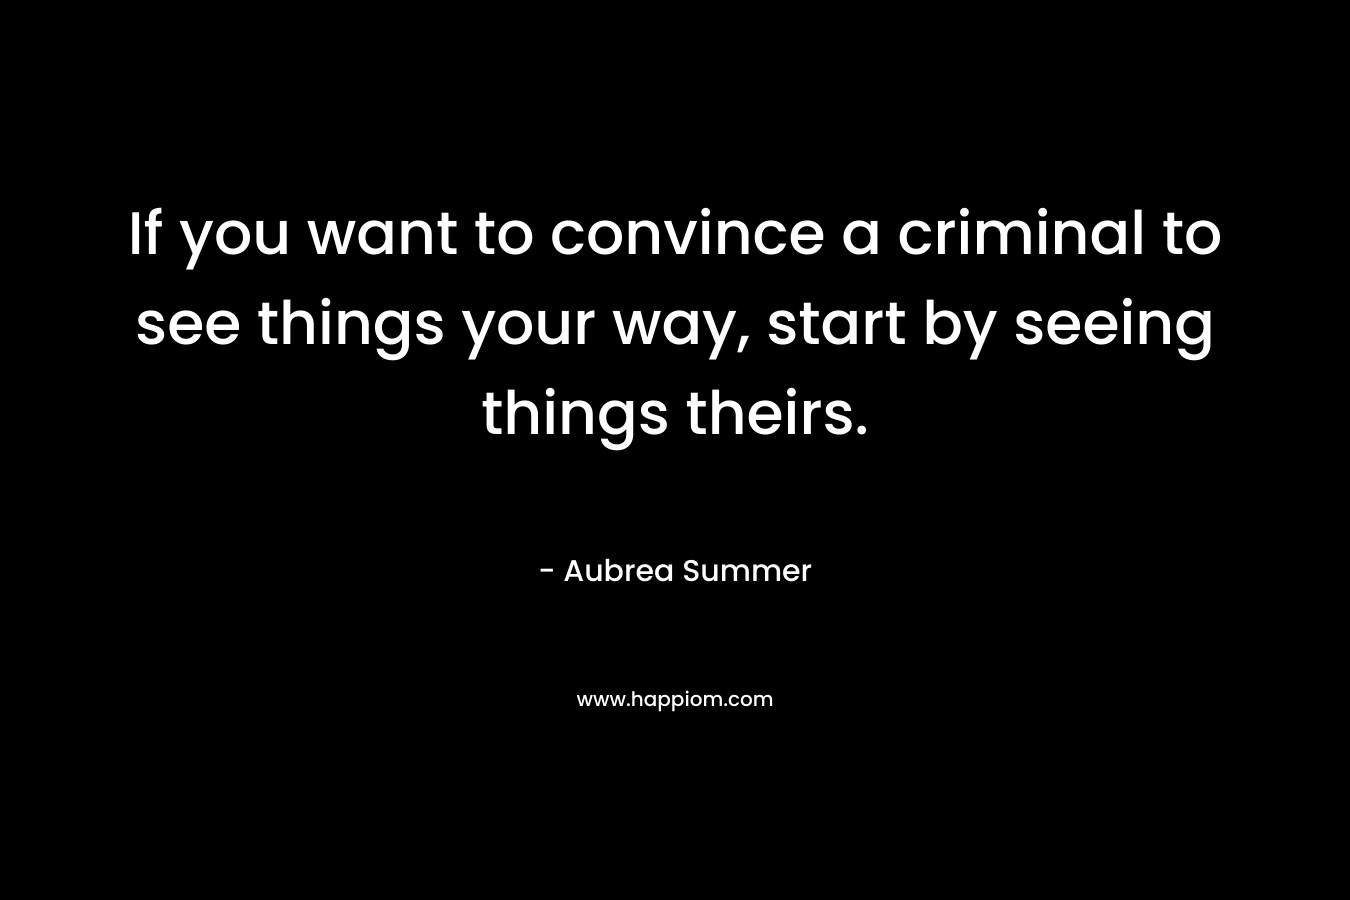 If you want to convince a criminal to see things your way, start by seeing things theirs. – Aubrea Summer